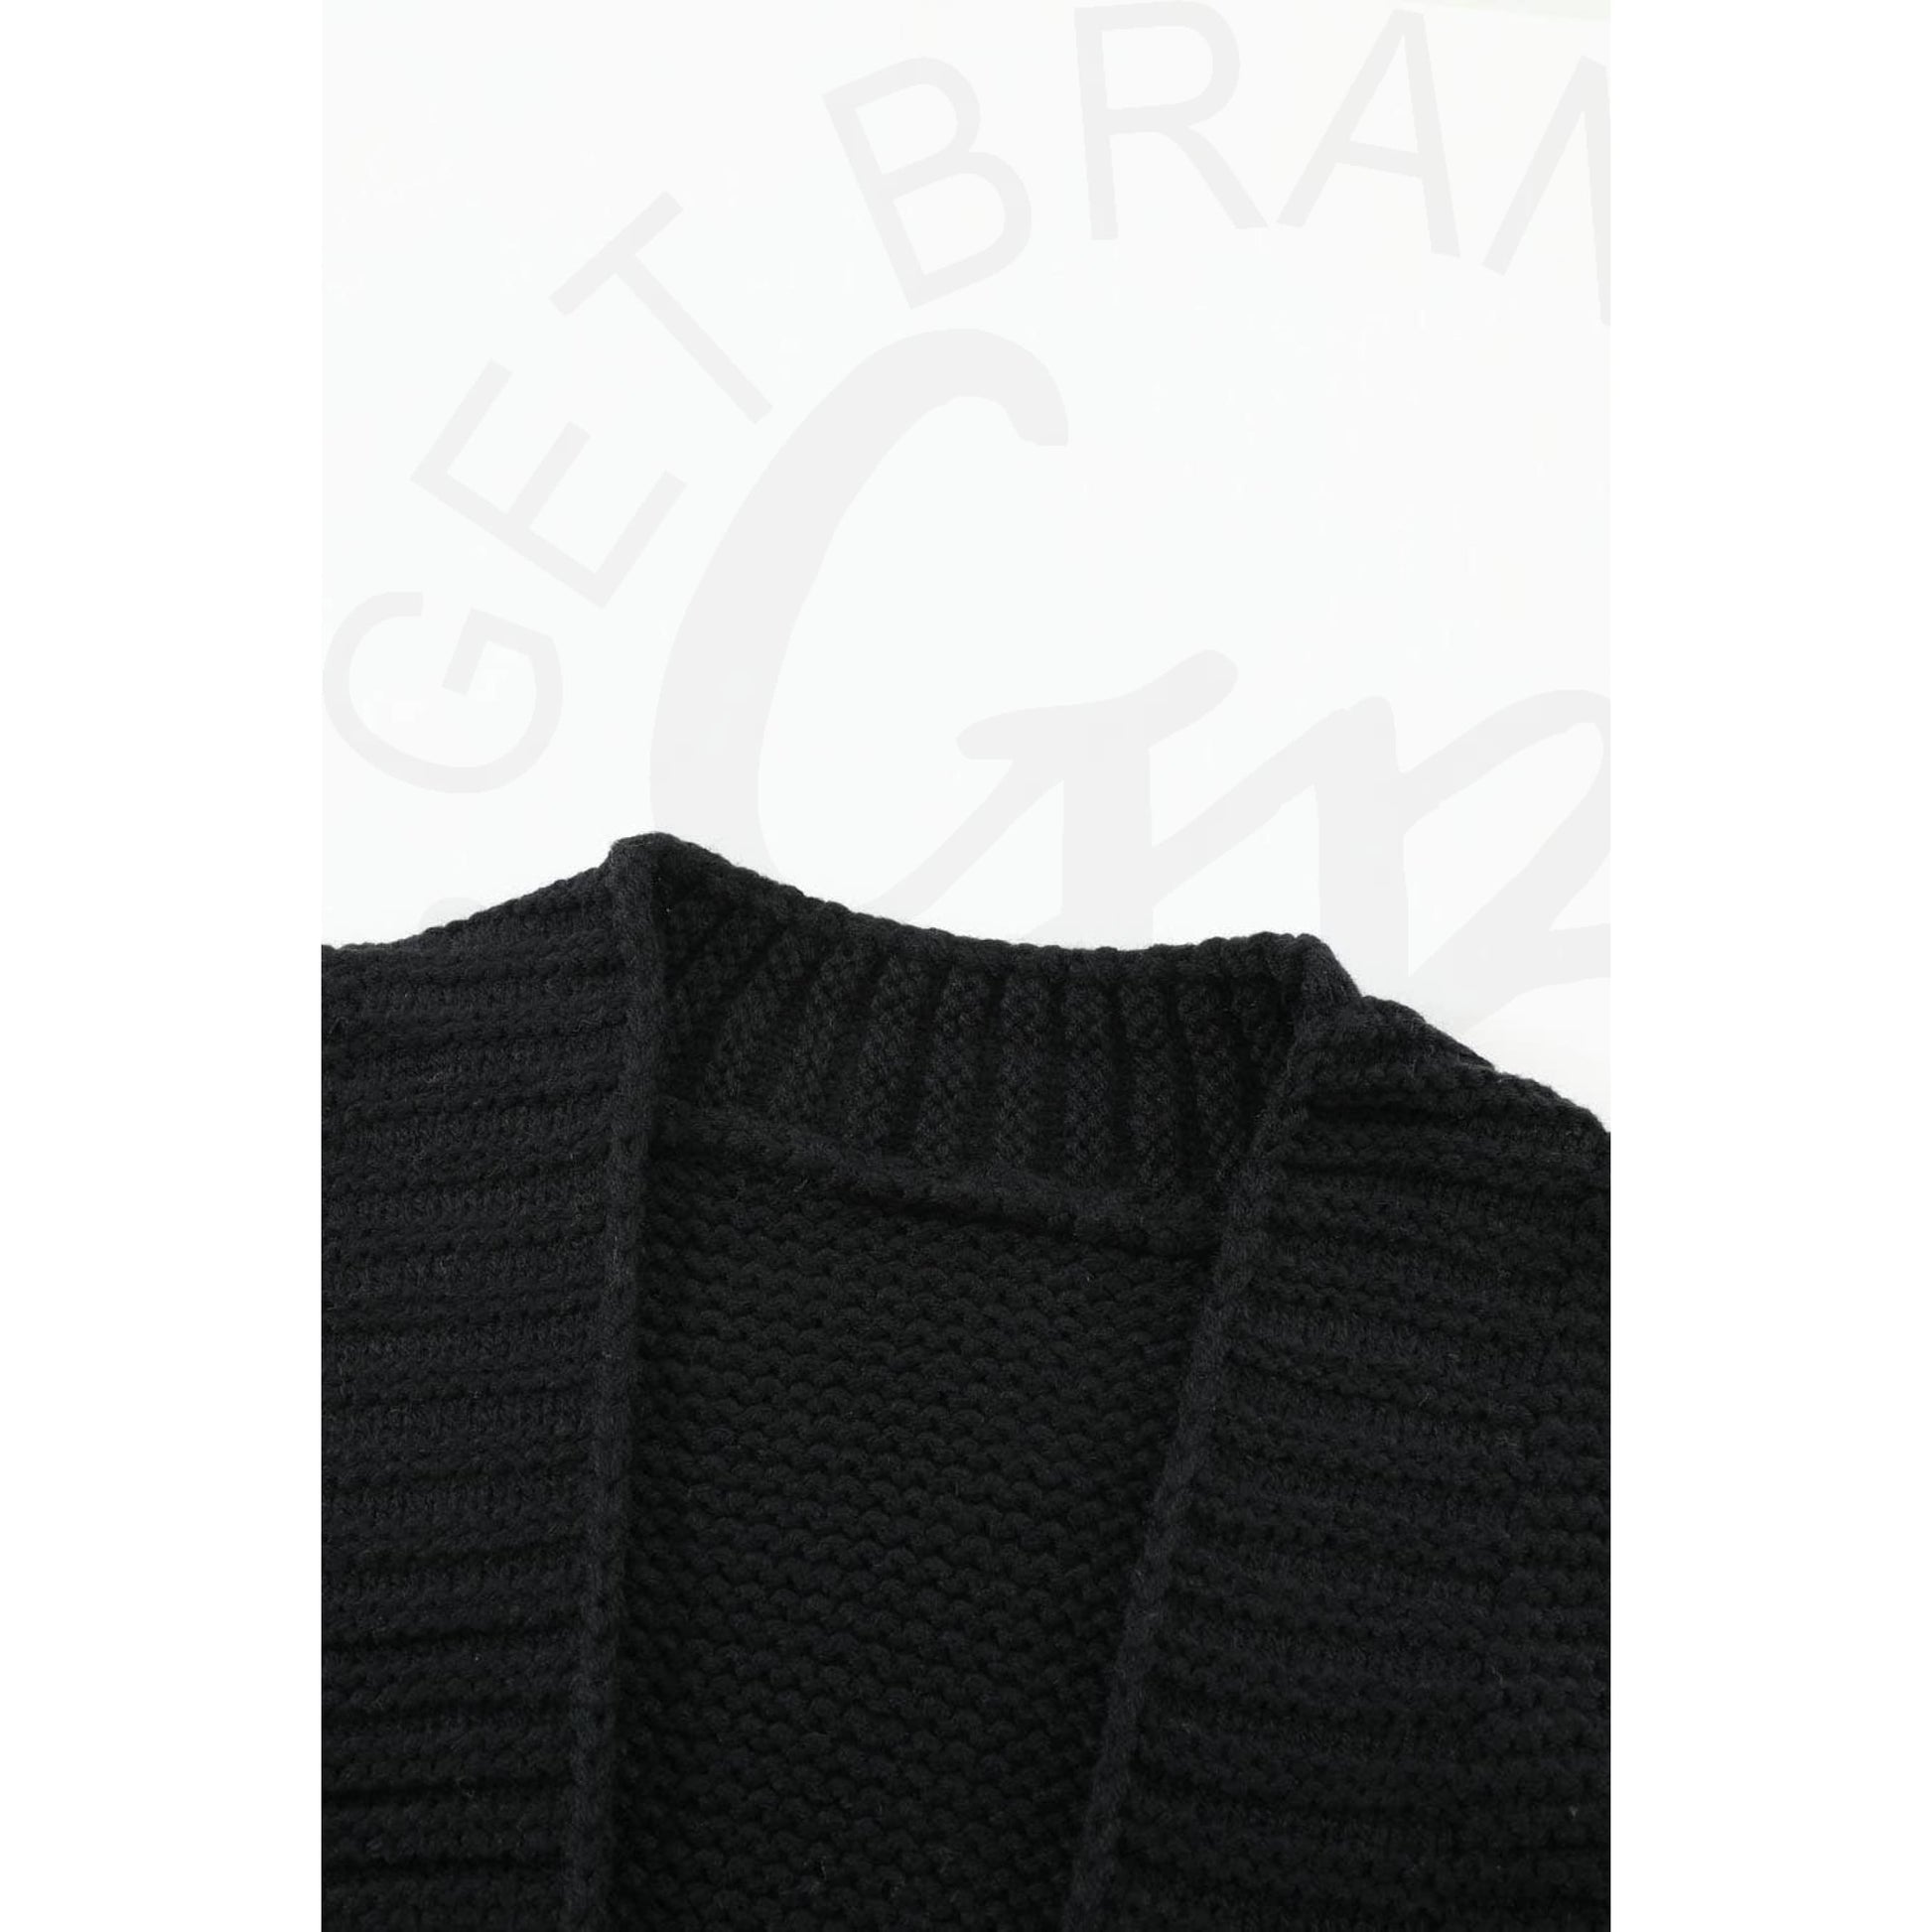 Black Open Front Chunky Knit Cardigan - Apparel &